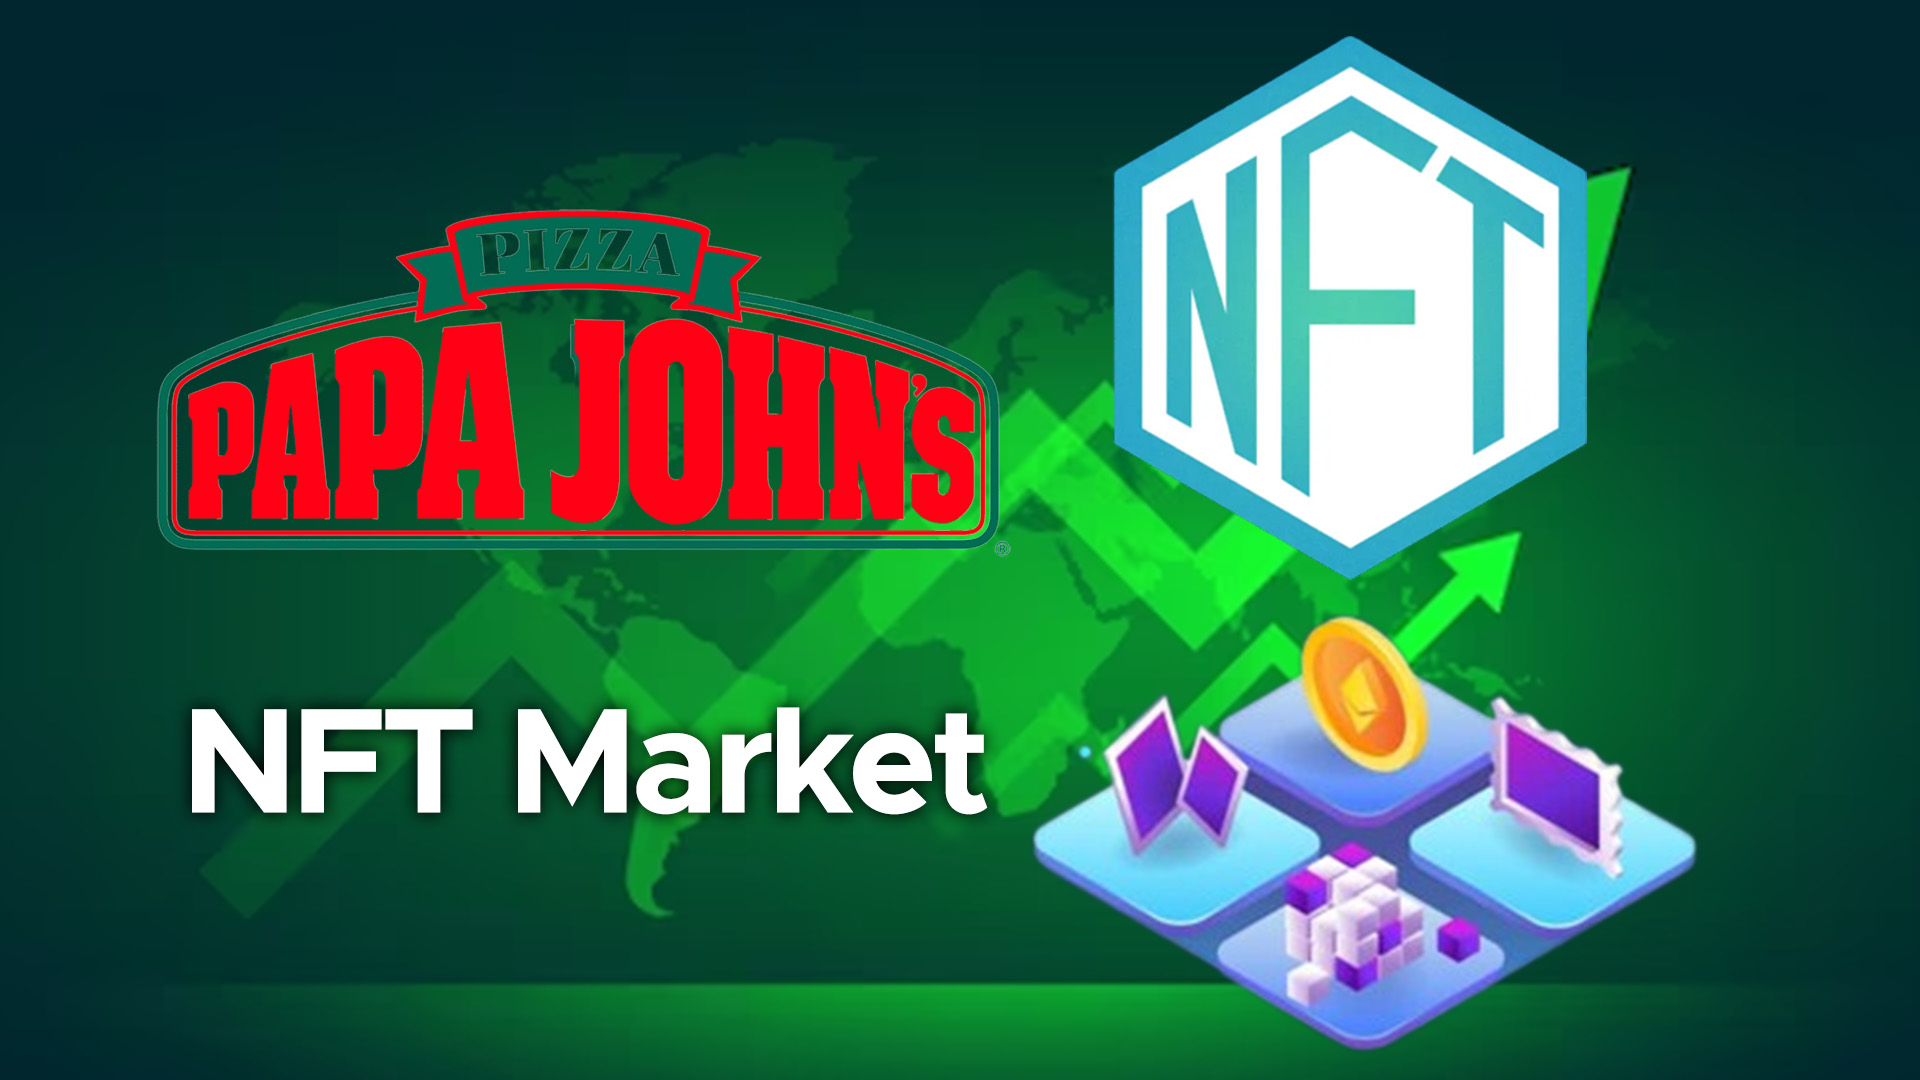 Papa John’s Enters NFT Market in Collaboration With One Rare